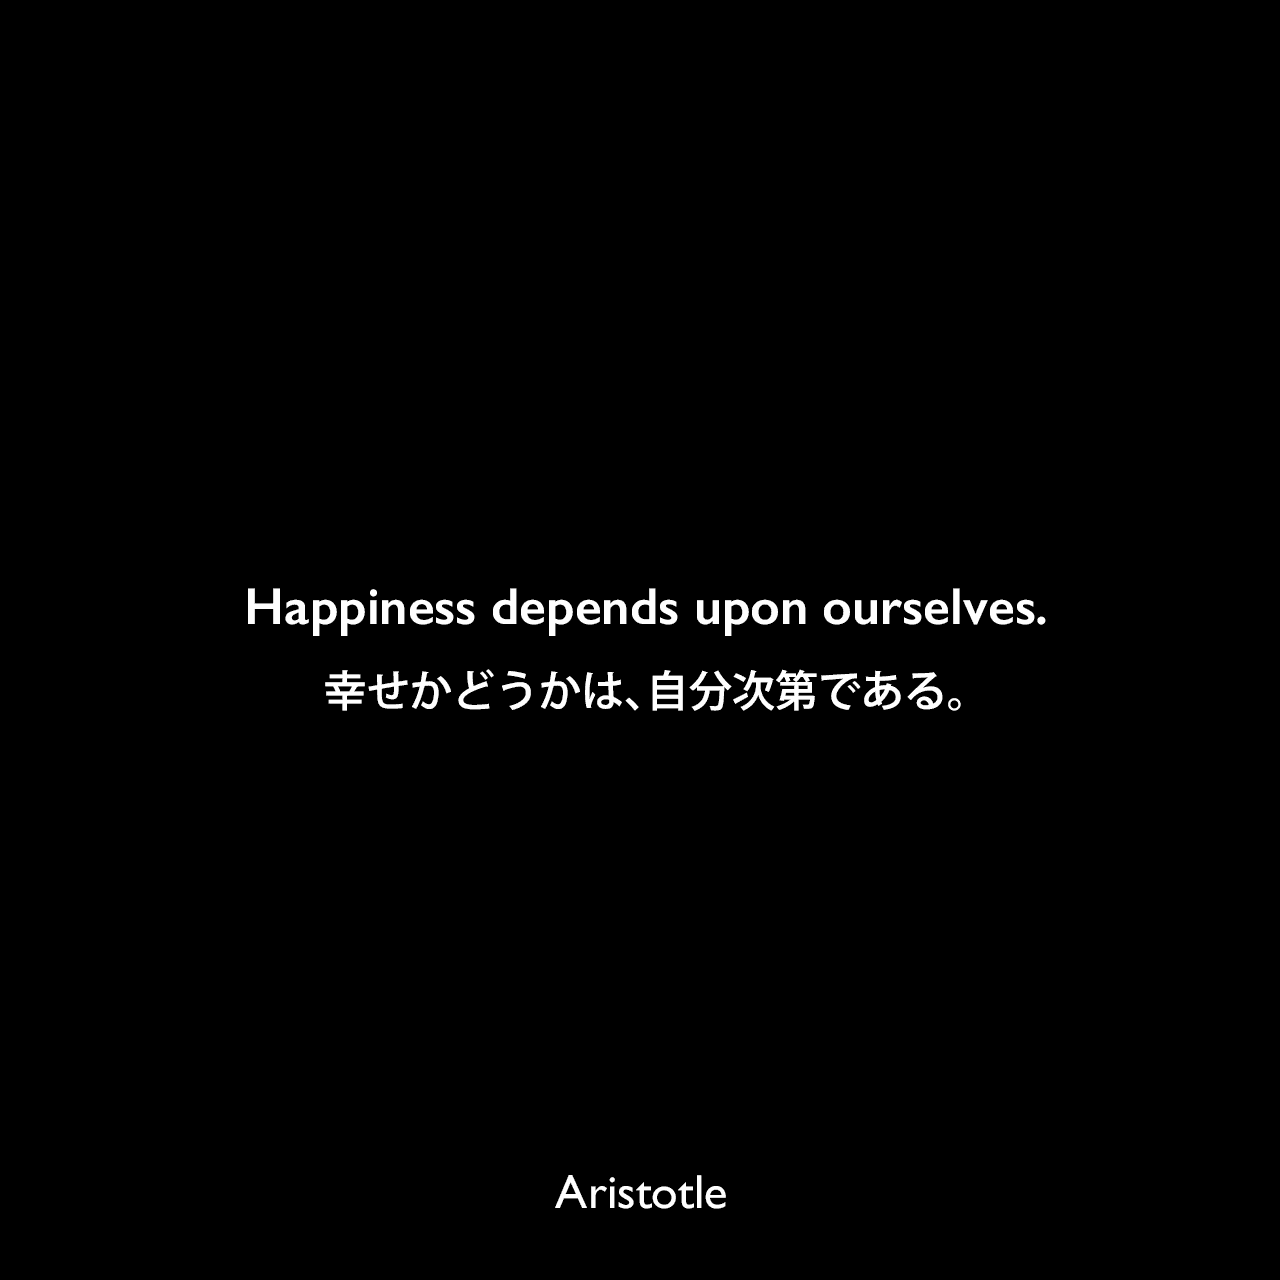 Happiness depends upon ourselves.幸せかどうかは、自分次第である。Aristotle